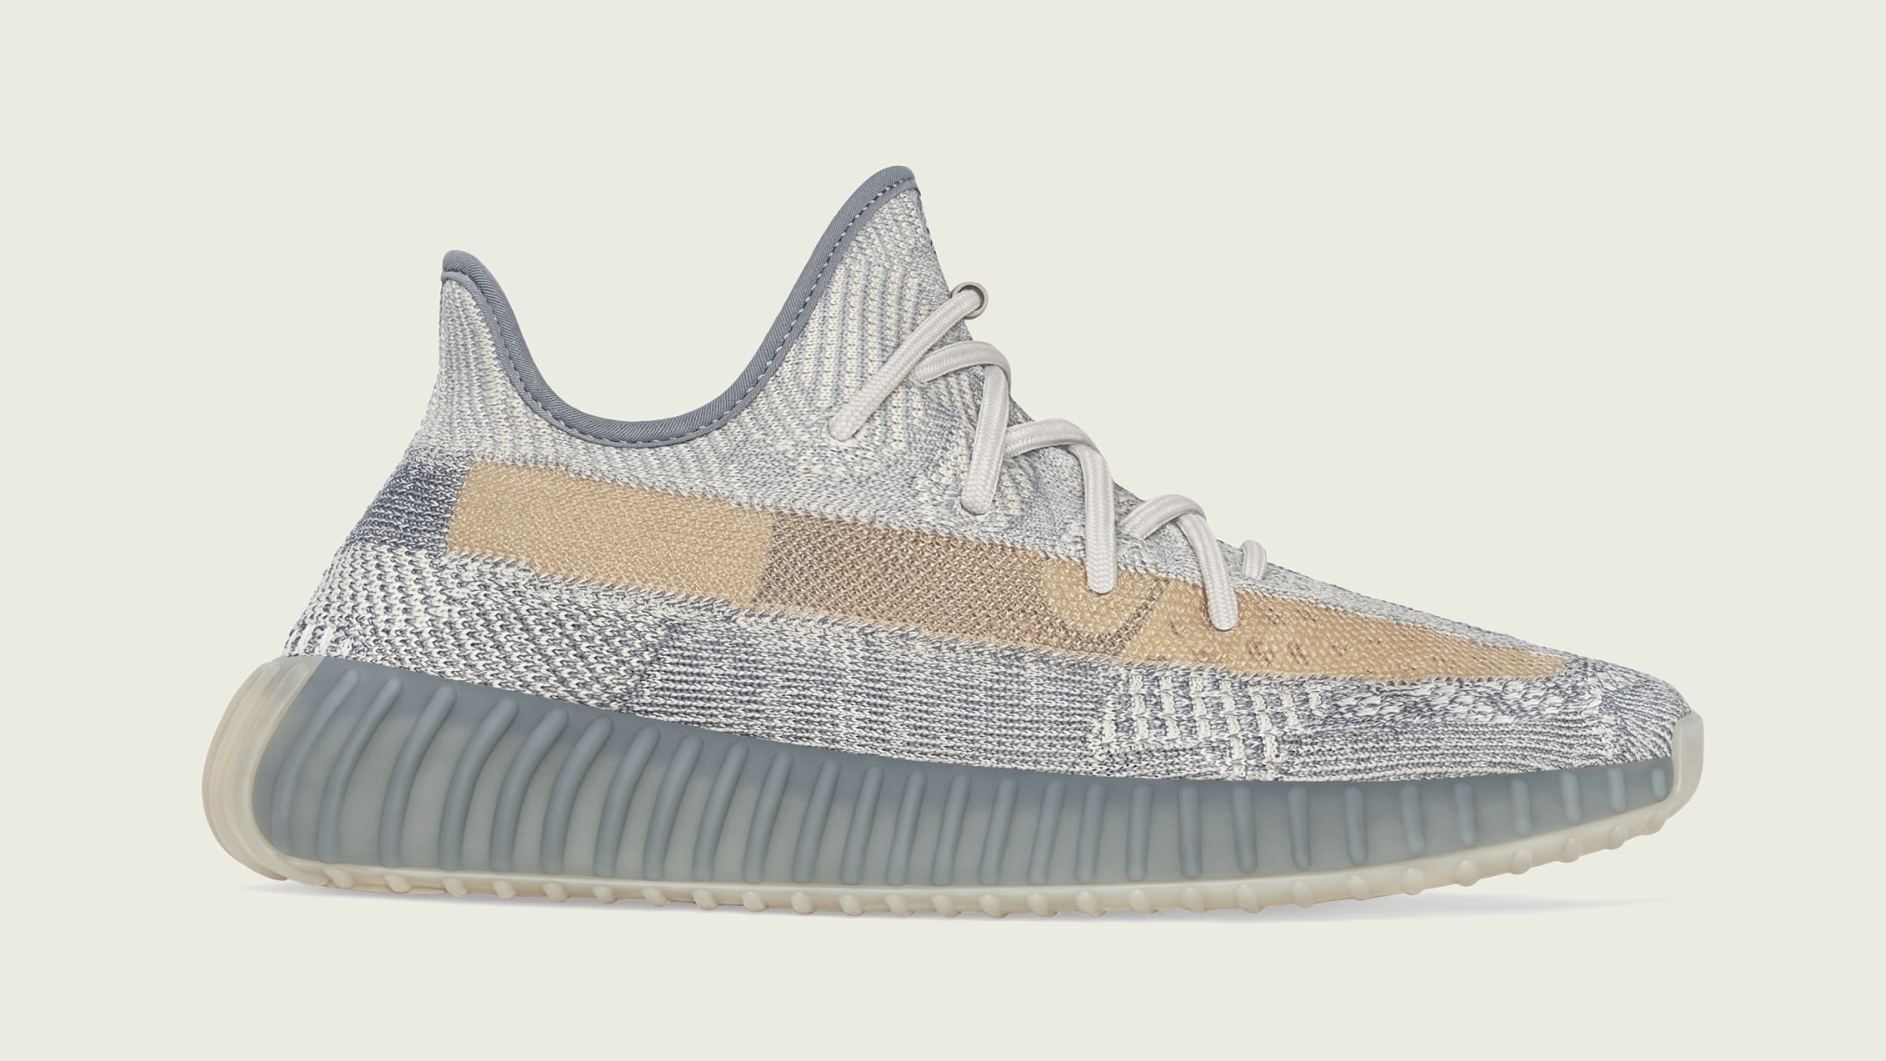 Adidas Yeezy Boost 350 V2 'Israfil' Release Date | Sole Collector